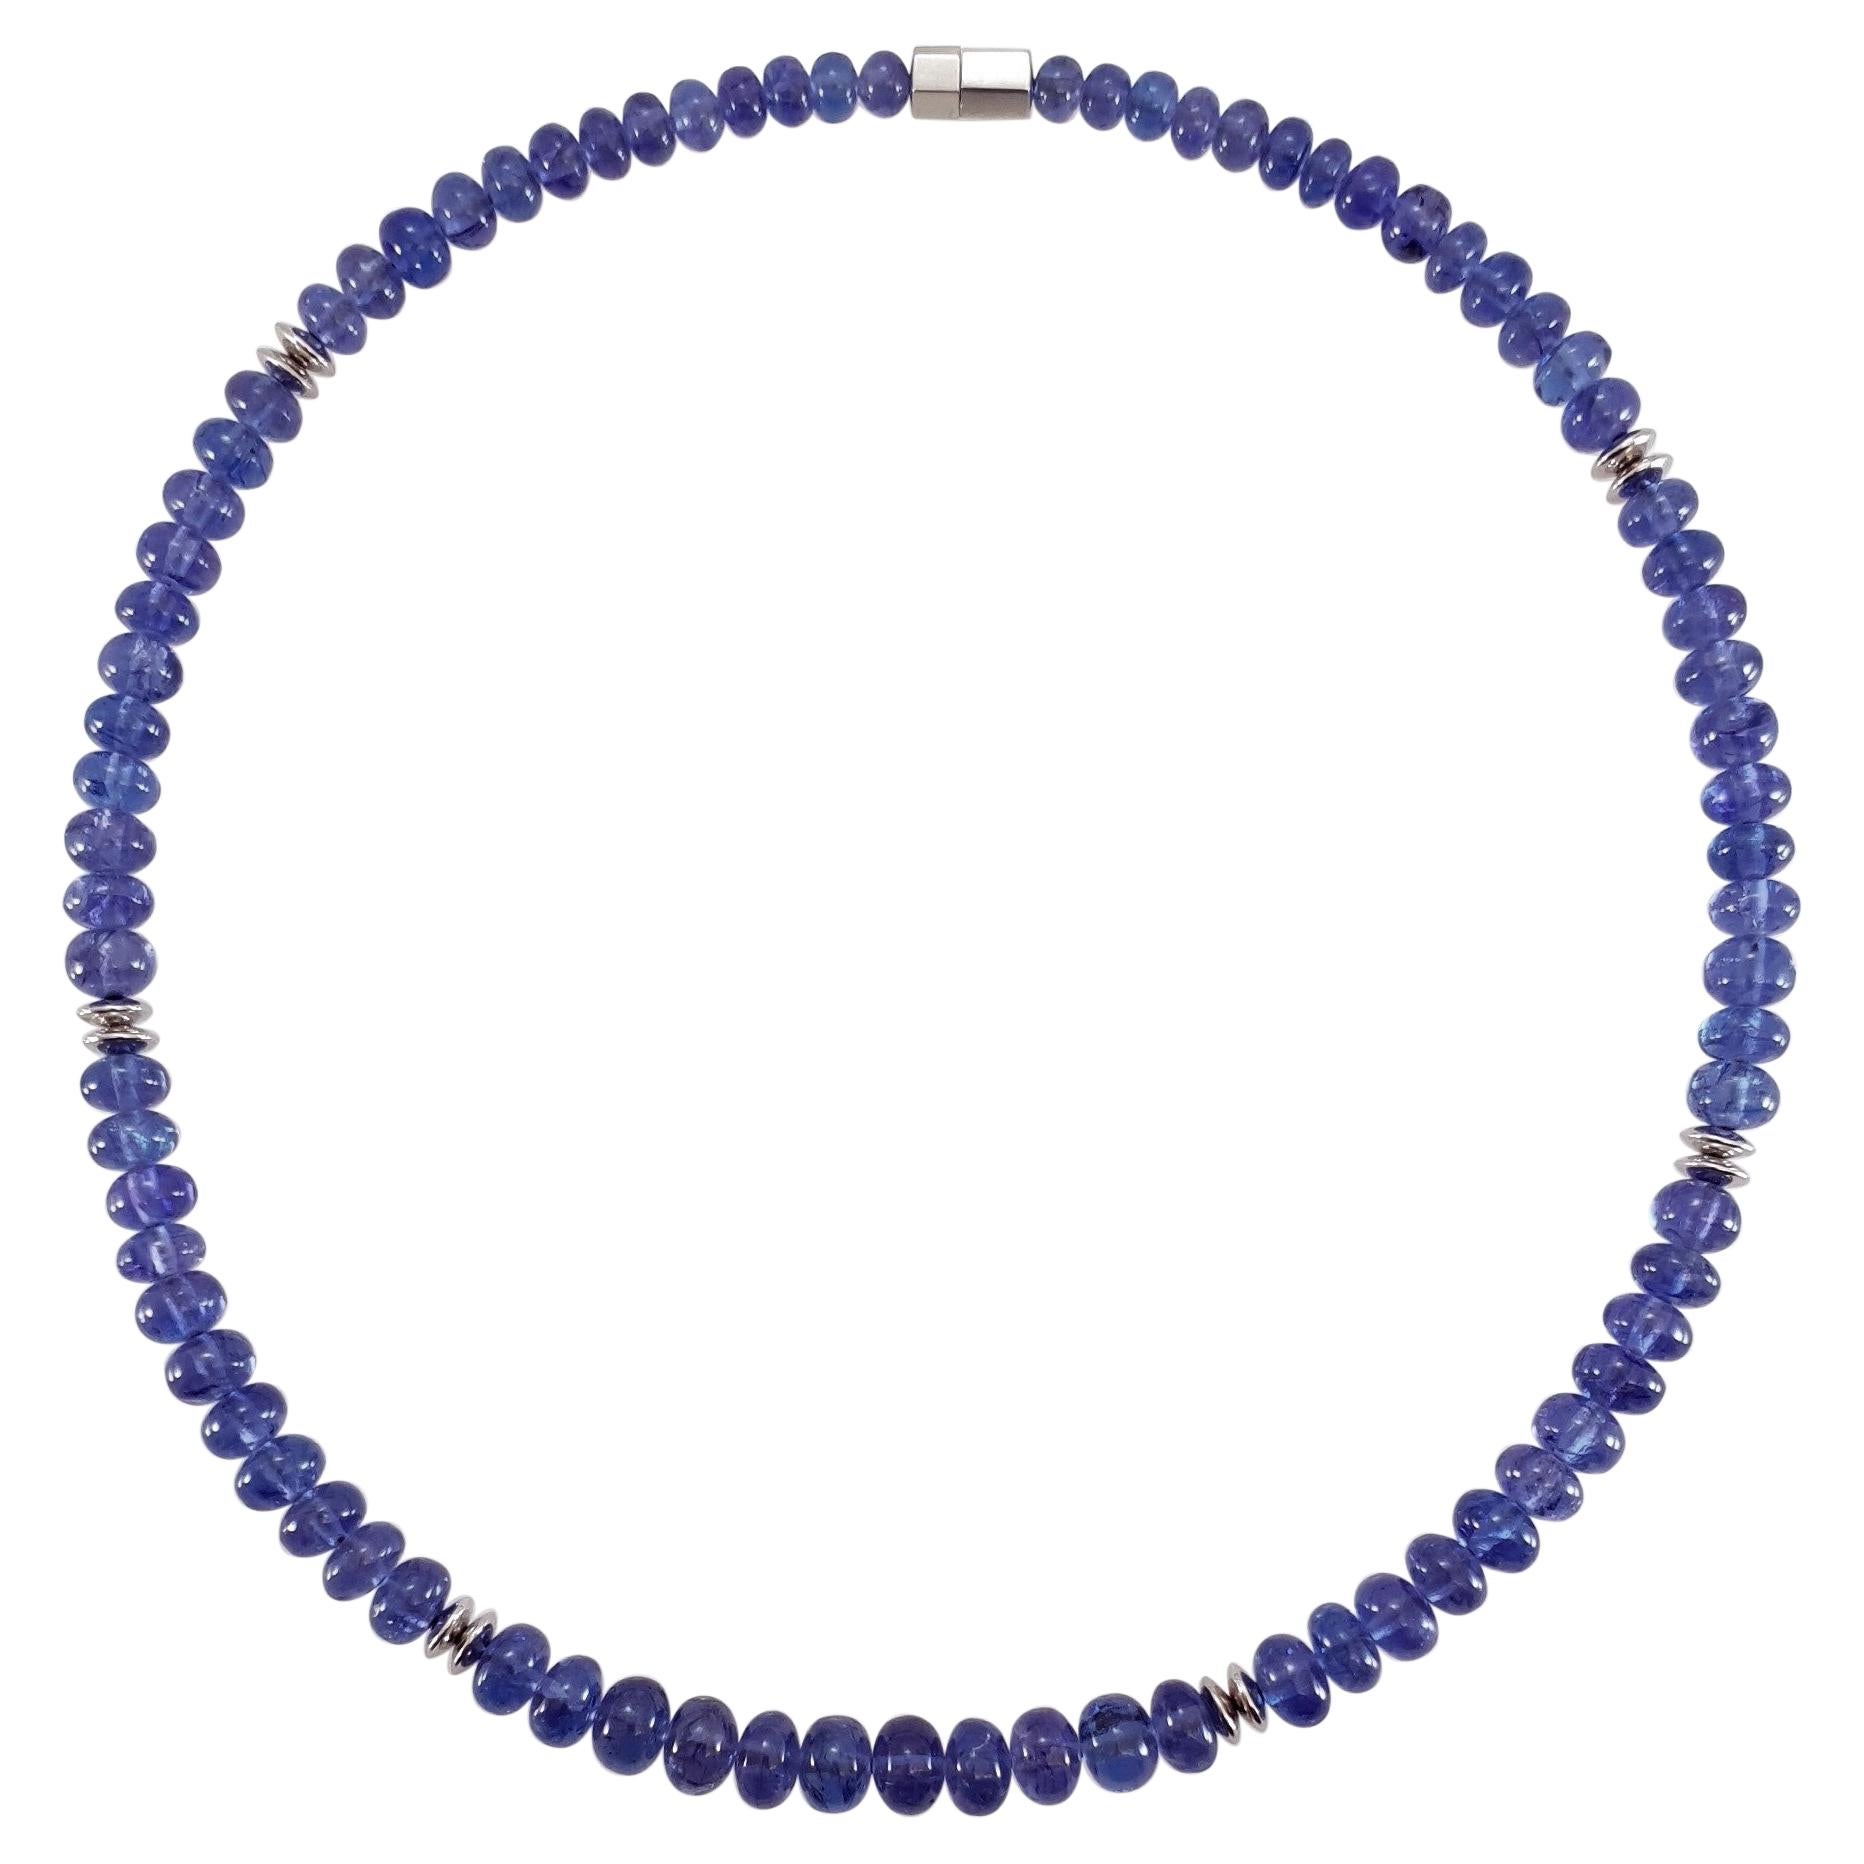 Cornflower Blue Tanzanite Rondel Beaded Necklace with 18 Carat White Gold